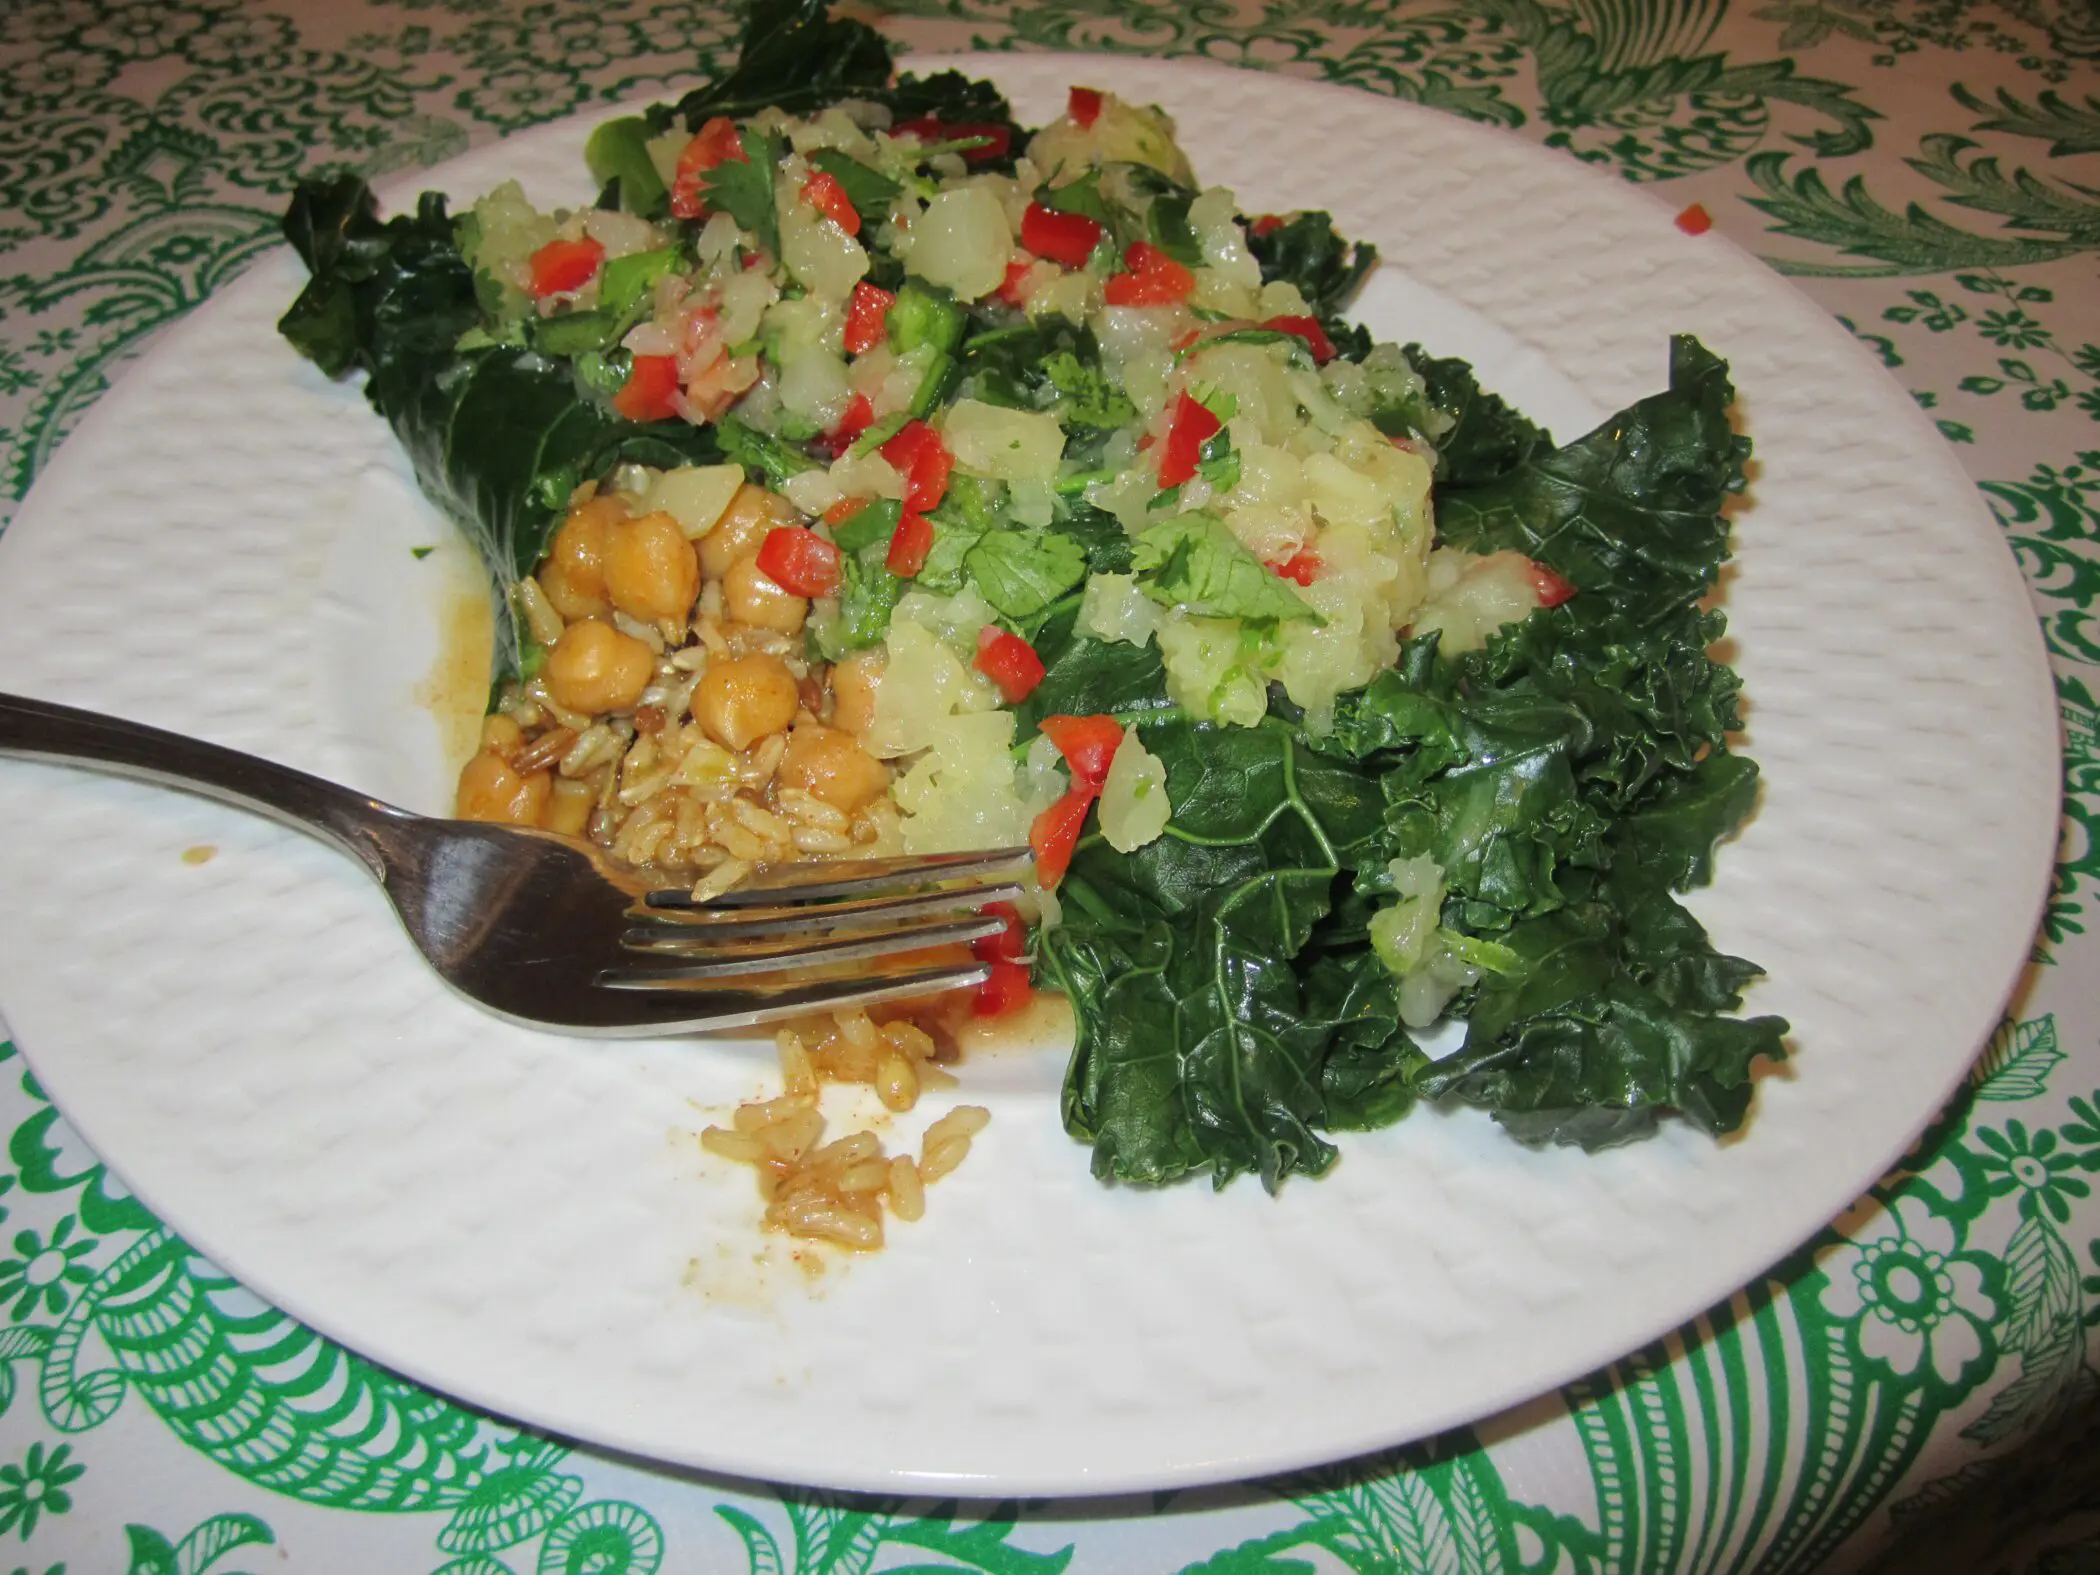 Rice & Chickpea Kale Rolls with Pineapple Salsa